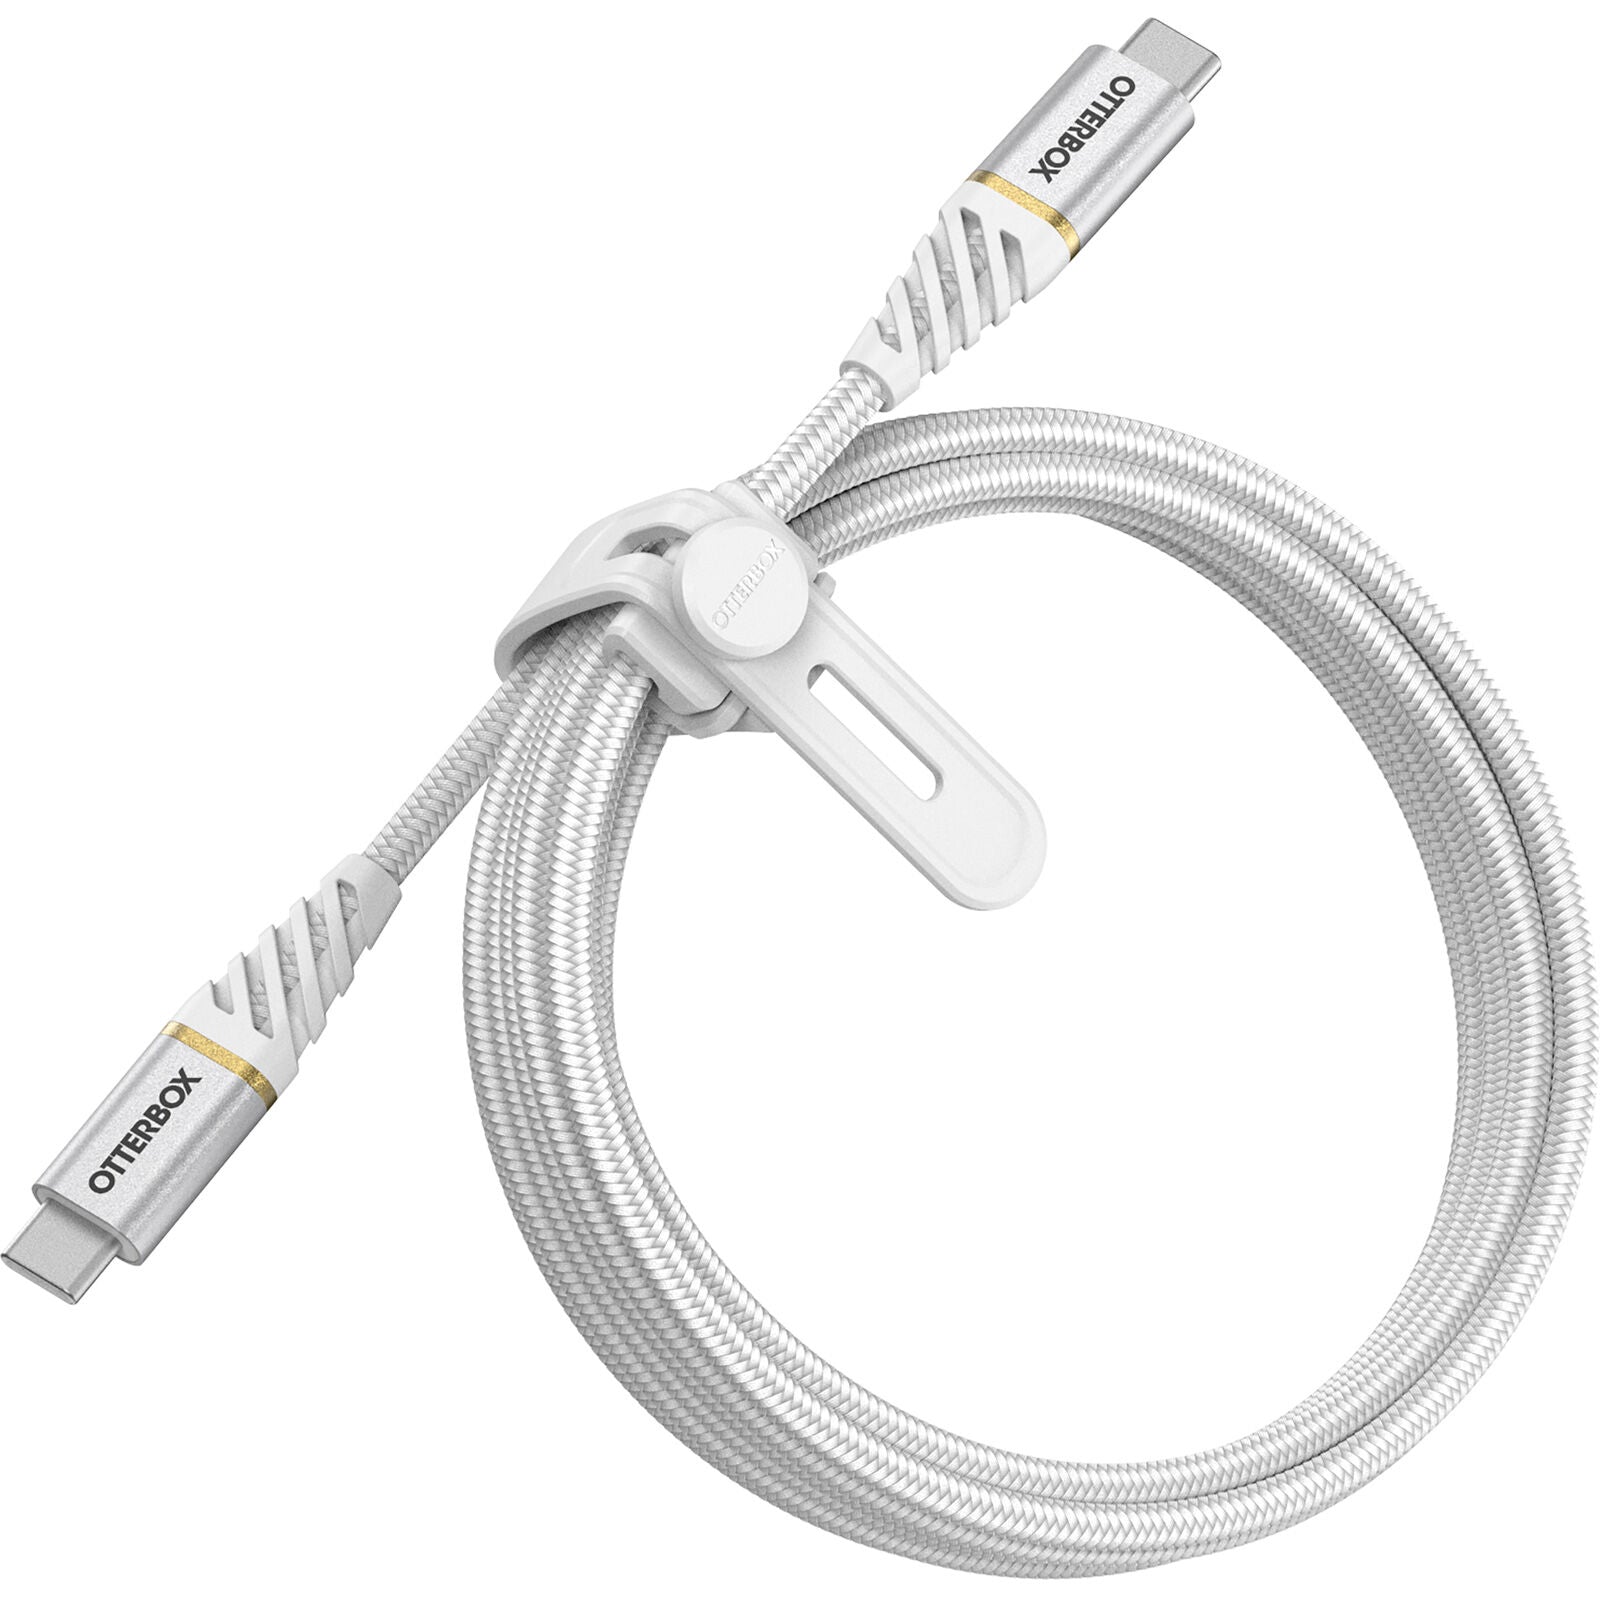 OtterBox USB-C to USB-C Fast Charge Premium Cable (2M) - White (78-52681),USB 2.0, 3 AMPS (60W) USB PD,Bend/Flex-Tested 10K Times,Braided Nylon,Rugged